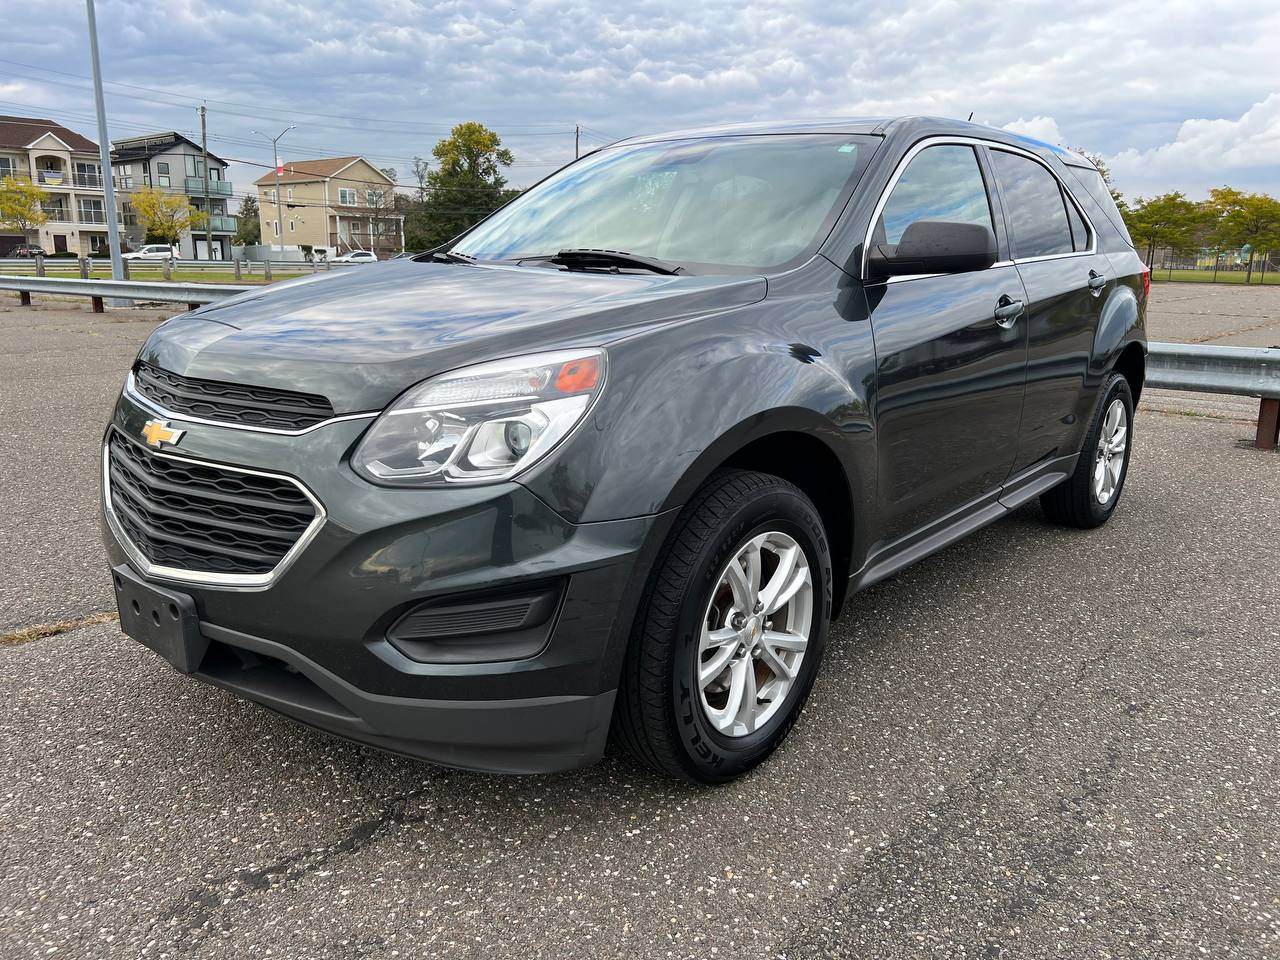 Used Car - 2017 Chevrolet Equinox LS for Sale in Staten Island, NY